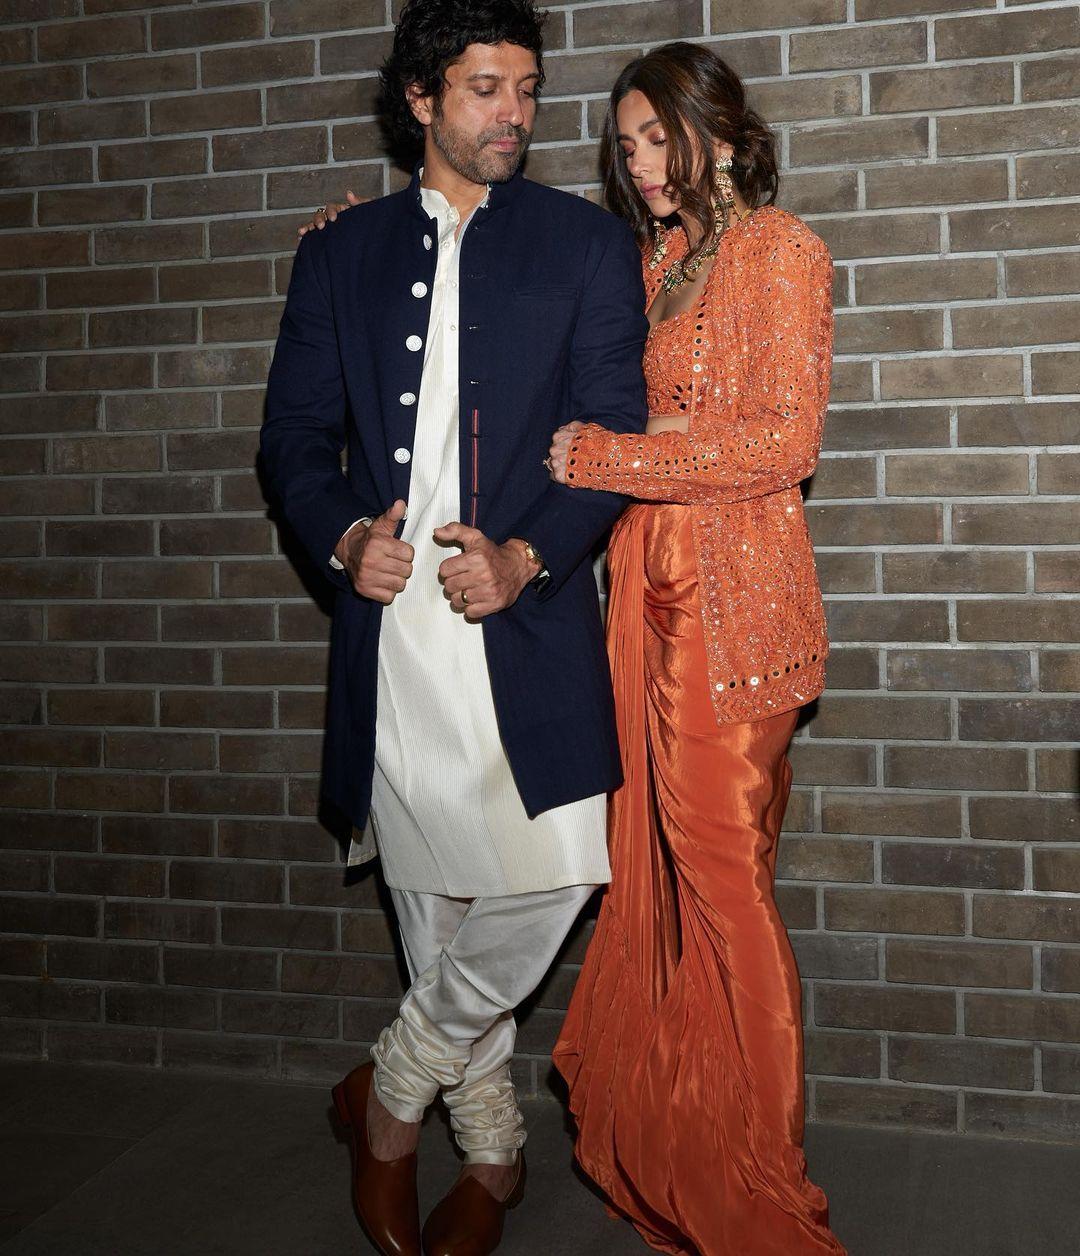 The best part of this look is that Shibani's outfit exudes the perfect ethnic vibe yet is very comfortable, ideal for those busy wedding days. For Farhan, his look is just perfect to slay the traditional appearance without overdoing anything